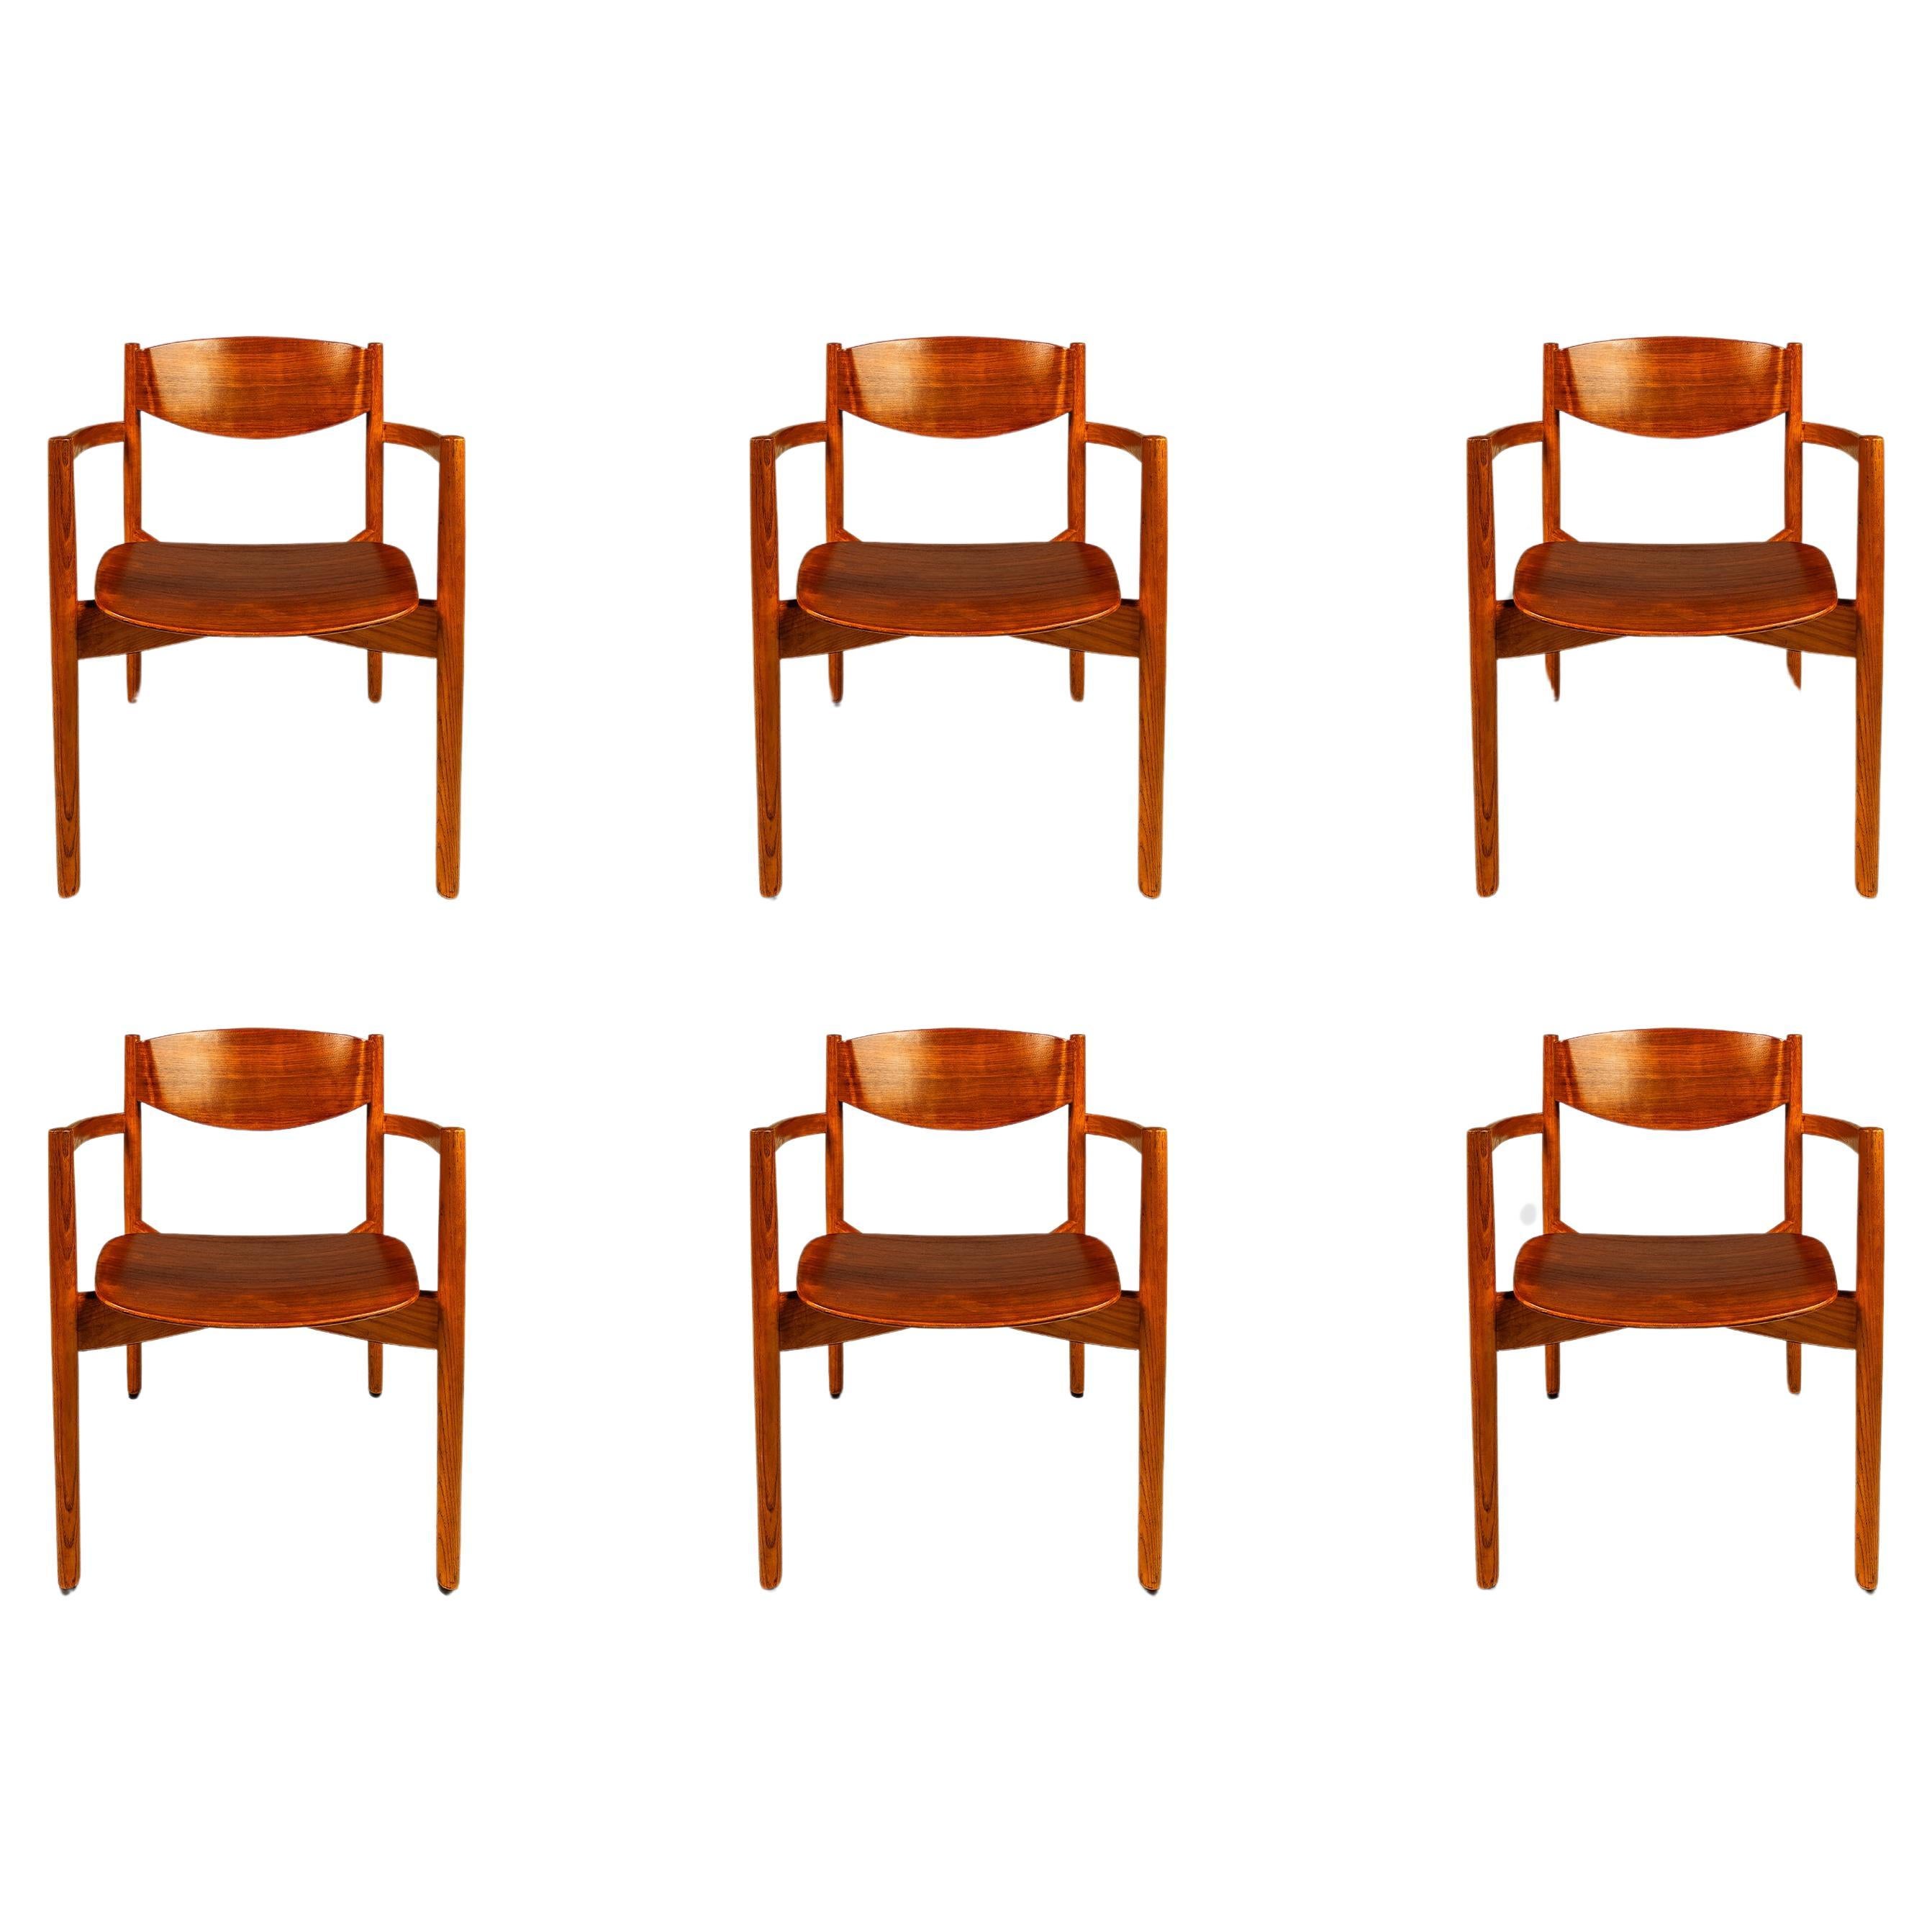 Set of 6 Stacking in Oak & Walnut Chairs by Jens Risom, USA, c. 1960s For Sale